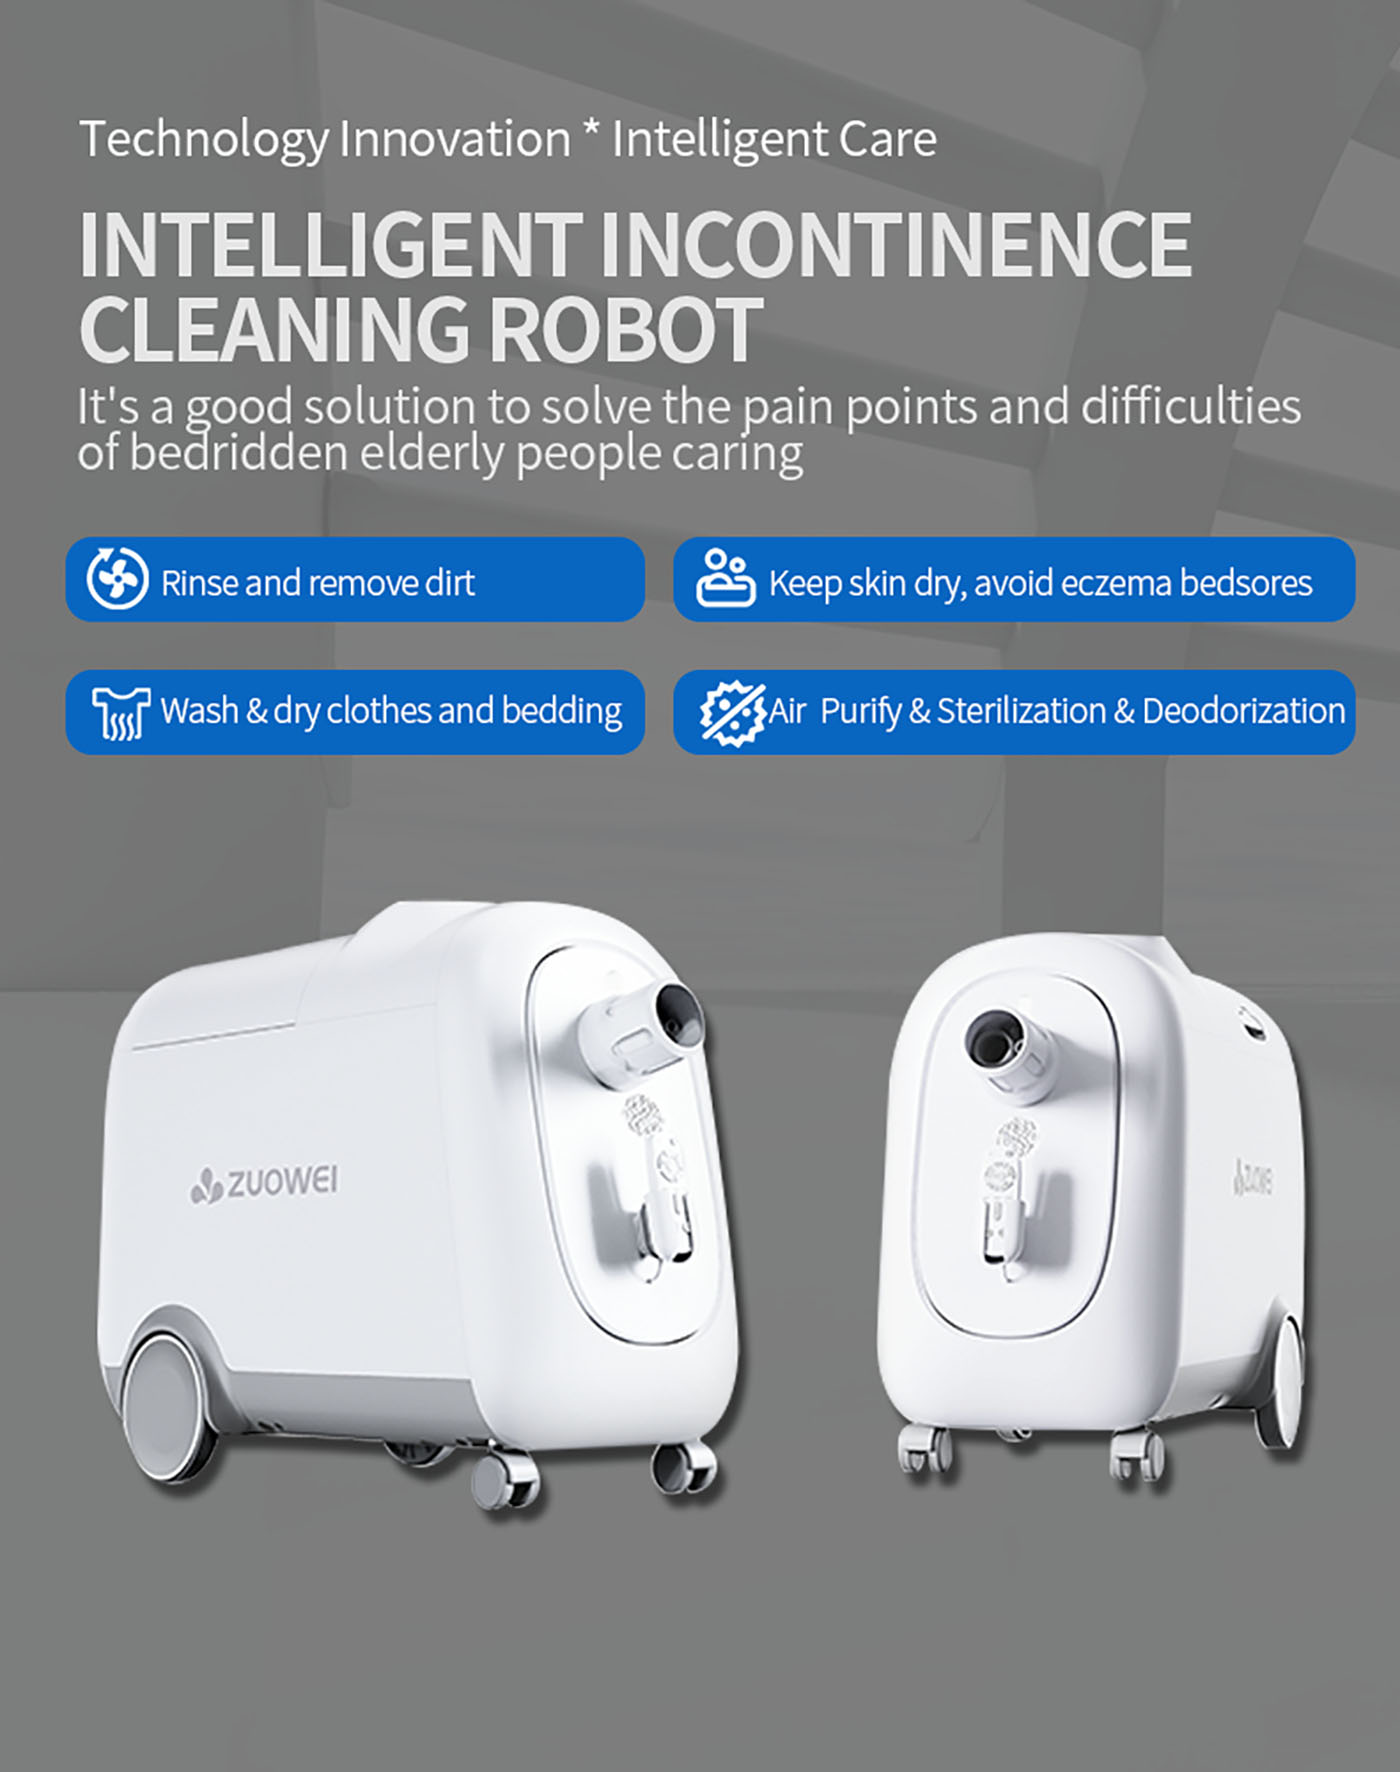 ZW279Pro Intelligent Incontinence Cleaning Robot-4 (6)